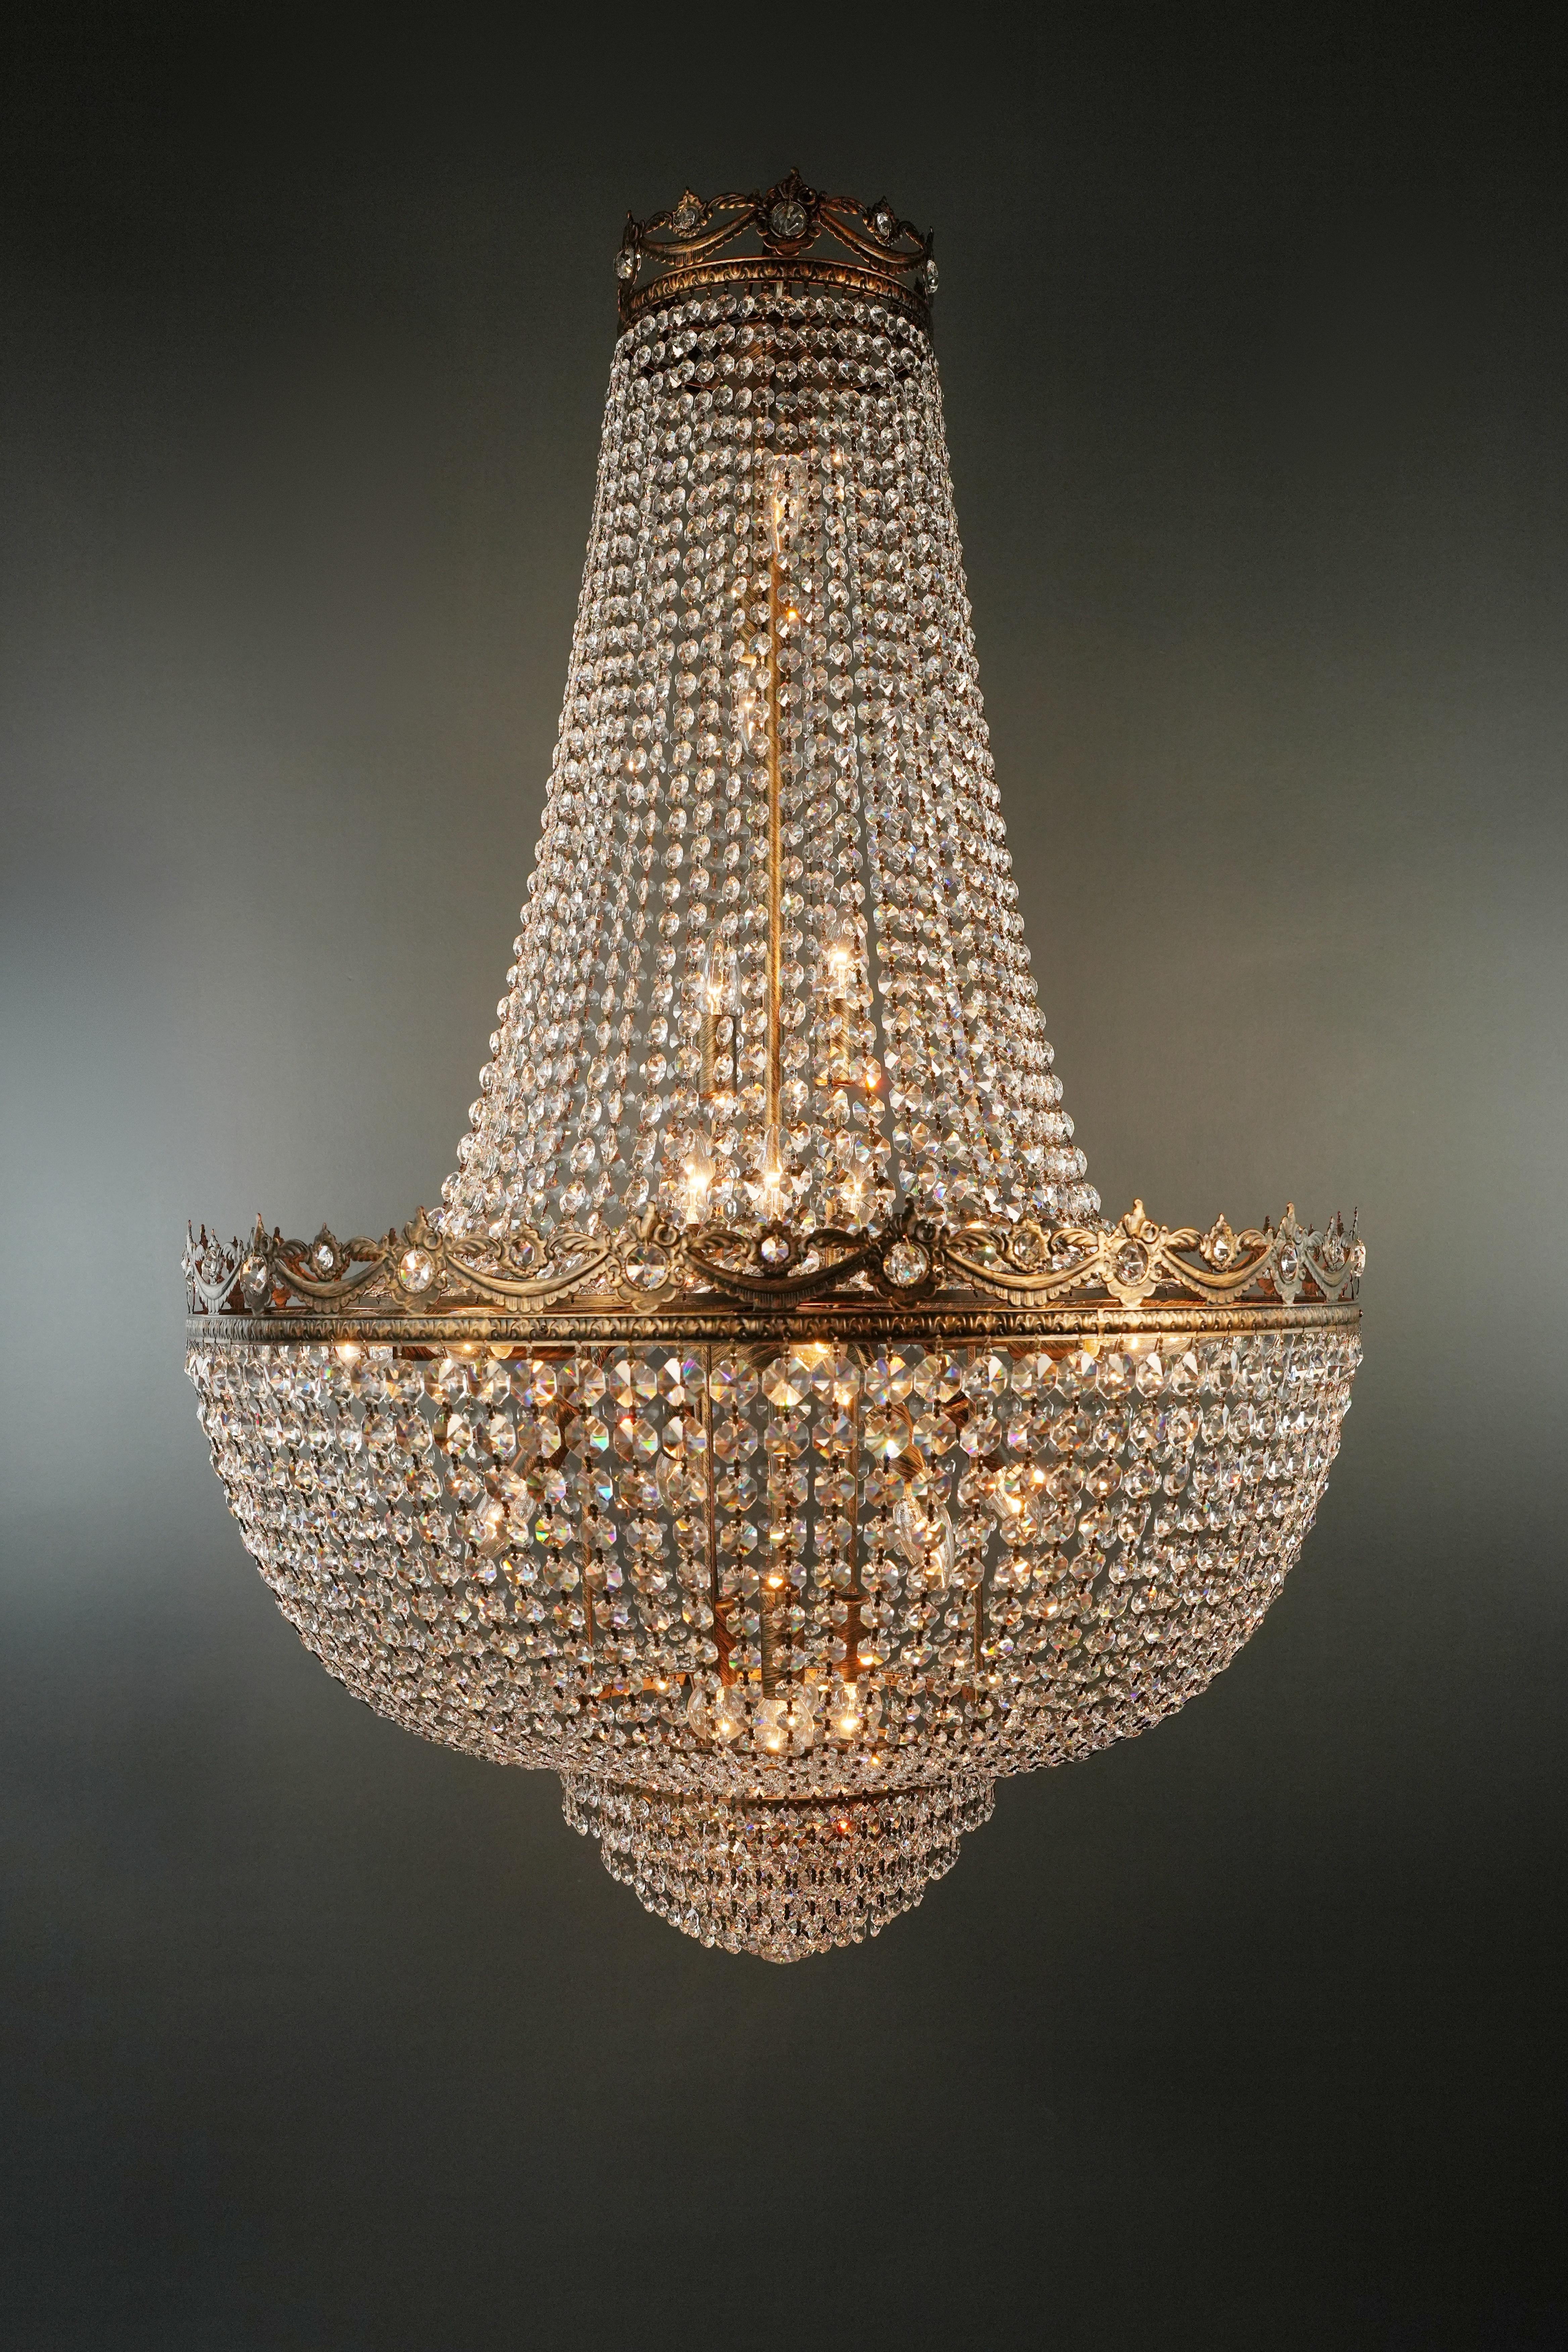 Montgolfière Style Chandelier - Empire Elegance with Customizability

Introducing a new Montgolfière style chandelier that exudes the charm of the Empire era, reimagined with modern elegance. Crafted from lead crystal, this exquisite piece is a